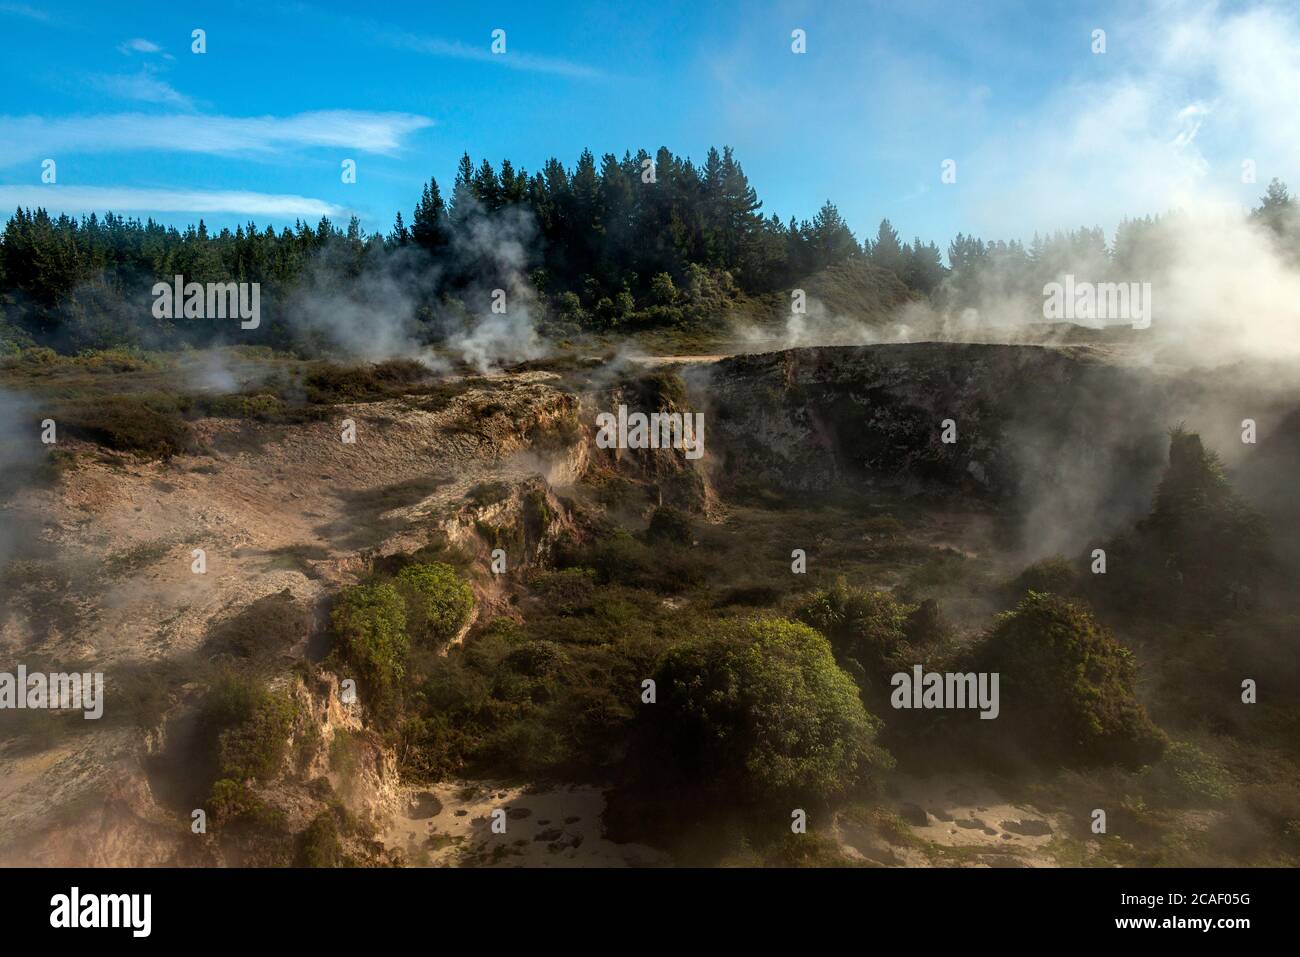 Geothermal steam venting from the many craters of the Craters of the Moon National Park, in Taupo, New Zealand. Stock Photo